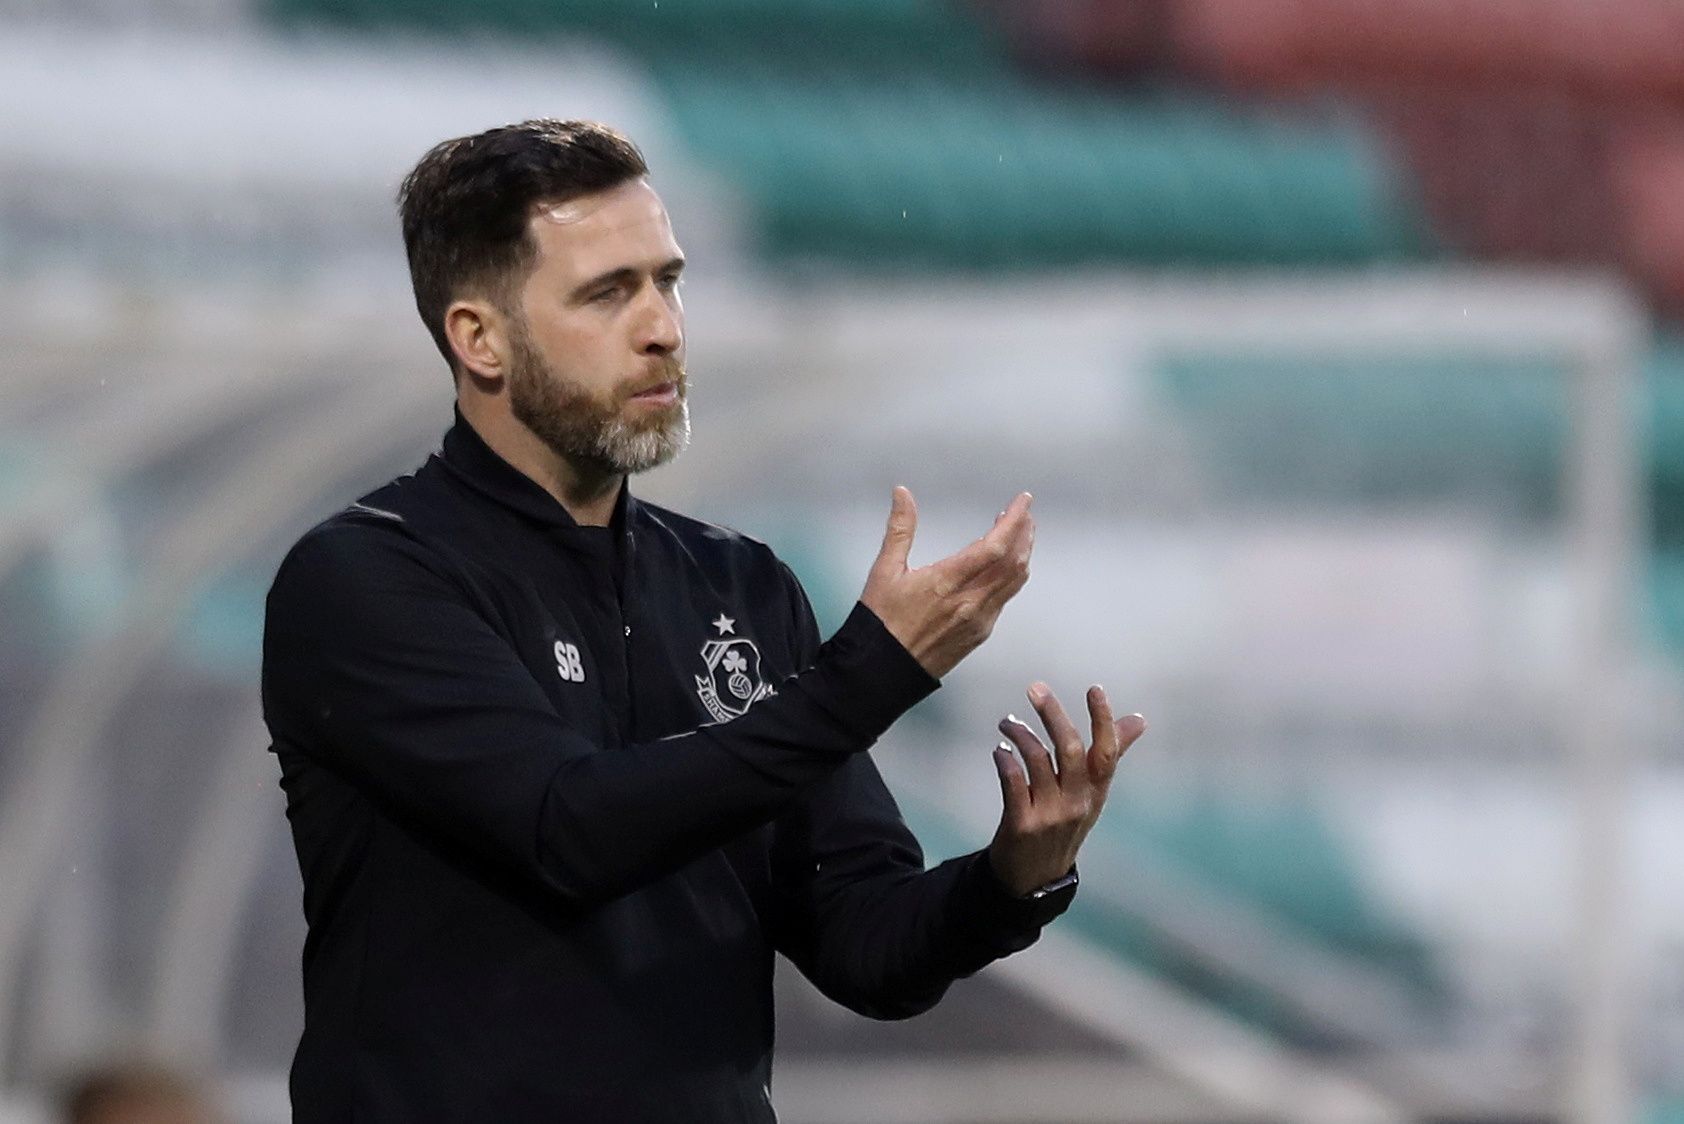 Soccer Football - Europa League - Second Qualifying Round - Shamrock Rovers v AC Milan - Tallaght Stadium, Tallaght, Ireland - September 17, 2020  Shamrock Rovers' Stephen Bradley during the match  REUTERS/Lorraine O'Sullivan